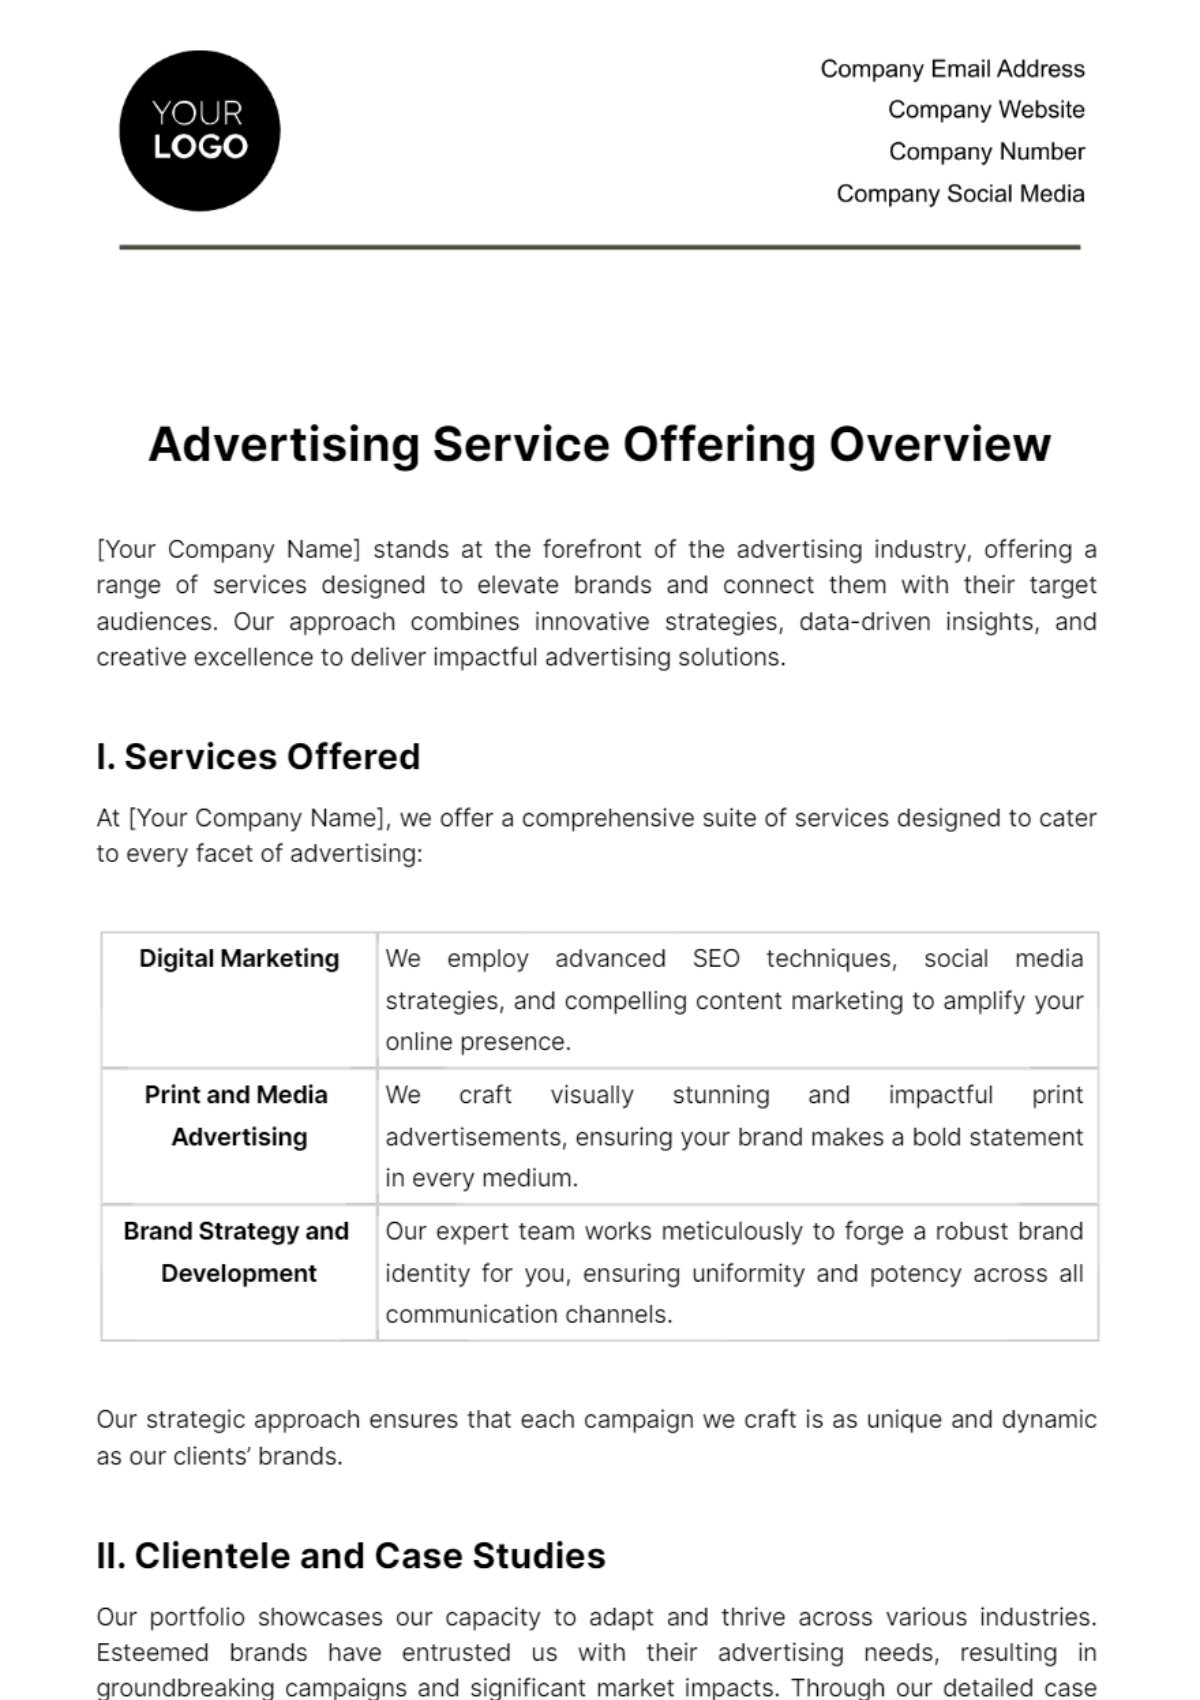 Advertising Service Offering Overview Template